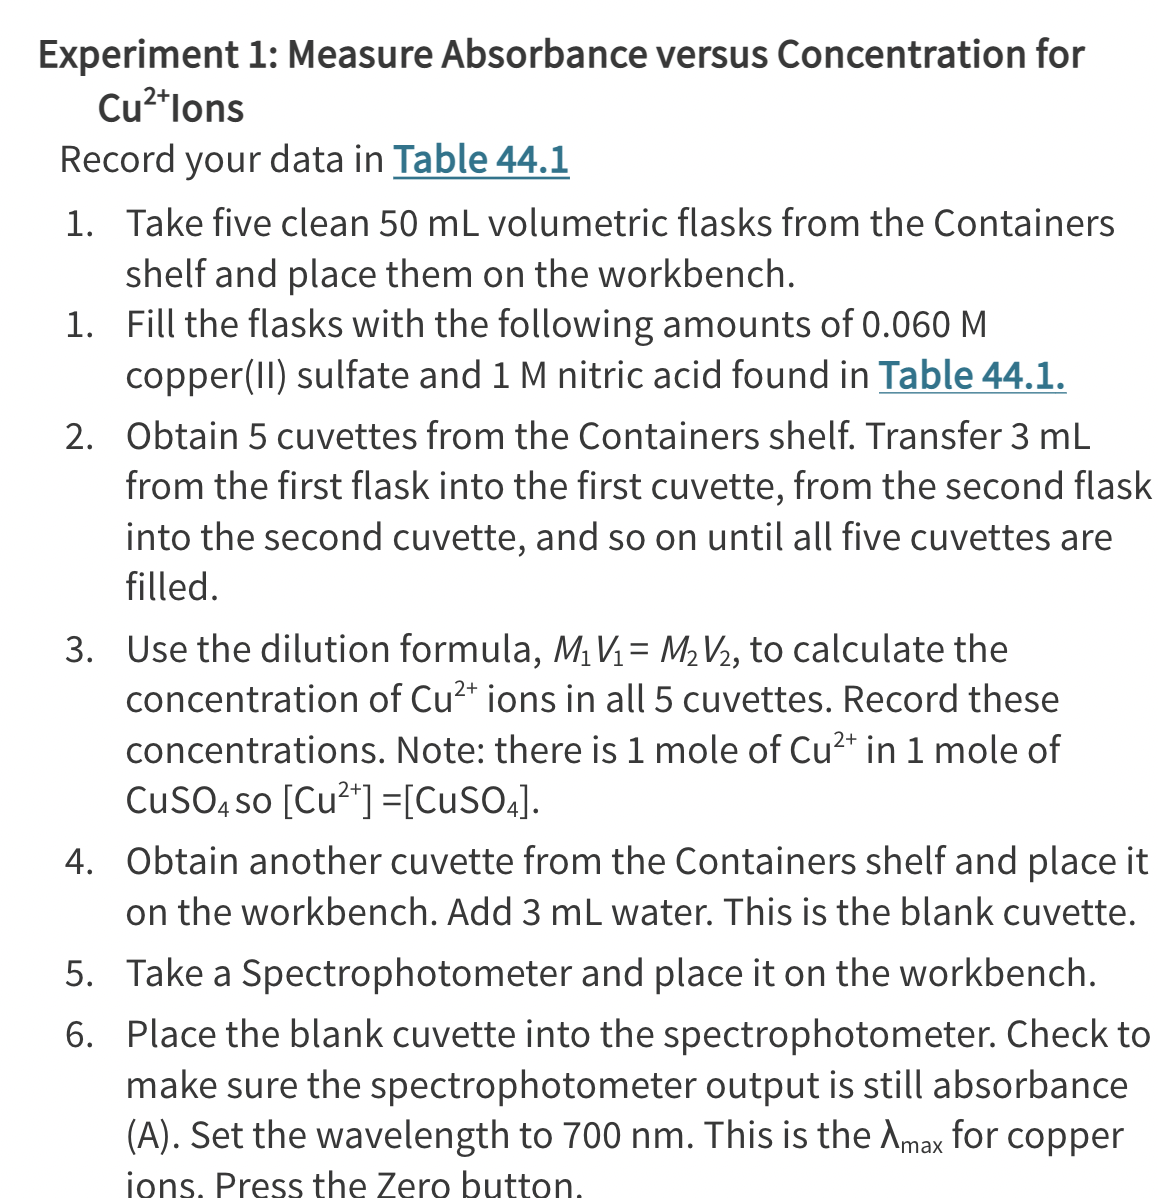 Experiment
Cu²+lons
1: Measure Absorbance versus Concentration for
Record your data in Table 44.1
1. Take five clean 50 mL volumetric flasks from the Containers
shelf and place them on the workbench.
1. Fill the flasks with the following amounts of 0.060 M
copper(II) sulfate and 1 M nitric acid found in Table 44.1.
2. Obtain 5 cuvettes from the Containers shelf. Transfer 3 mL
from the first flask into the first cuvette, from the second flask
into the second cuvette, and so on until all five cuvettes are
filled.
3. Use the dilution formula, M₁ V₁ = M₂V/₂, to calculate the
concentration of Cu²+ ions in all 5 cuvettes. Record these
concentrations. Note: there is 1 mole of Cu²+ in 1 mole of
CuSO4 so [Cu²+] =[CuSO4].
4. Obtain another cuvette from the Containers shelf and place it
on the workbench. Add 3 mL water. This is the blank cuvette.
5. Take a Spectrophotometer and place it on the workbench.
Place the blank cuvette into the spectrophotometer. Check to
make sure the spectrophotometer output is still absorbance
(A). Set the wavelength to 700 nm. This is the Amax for copper
ions. Press the Zero button.
6.